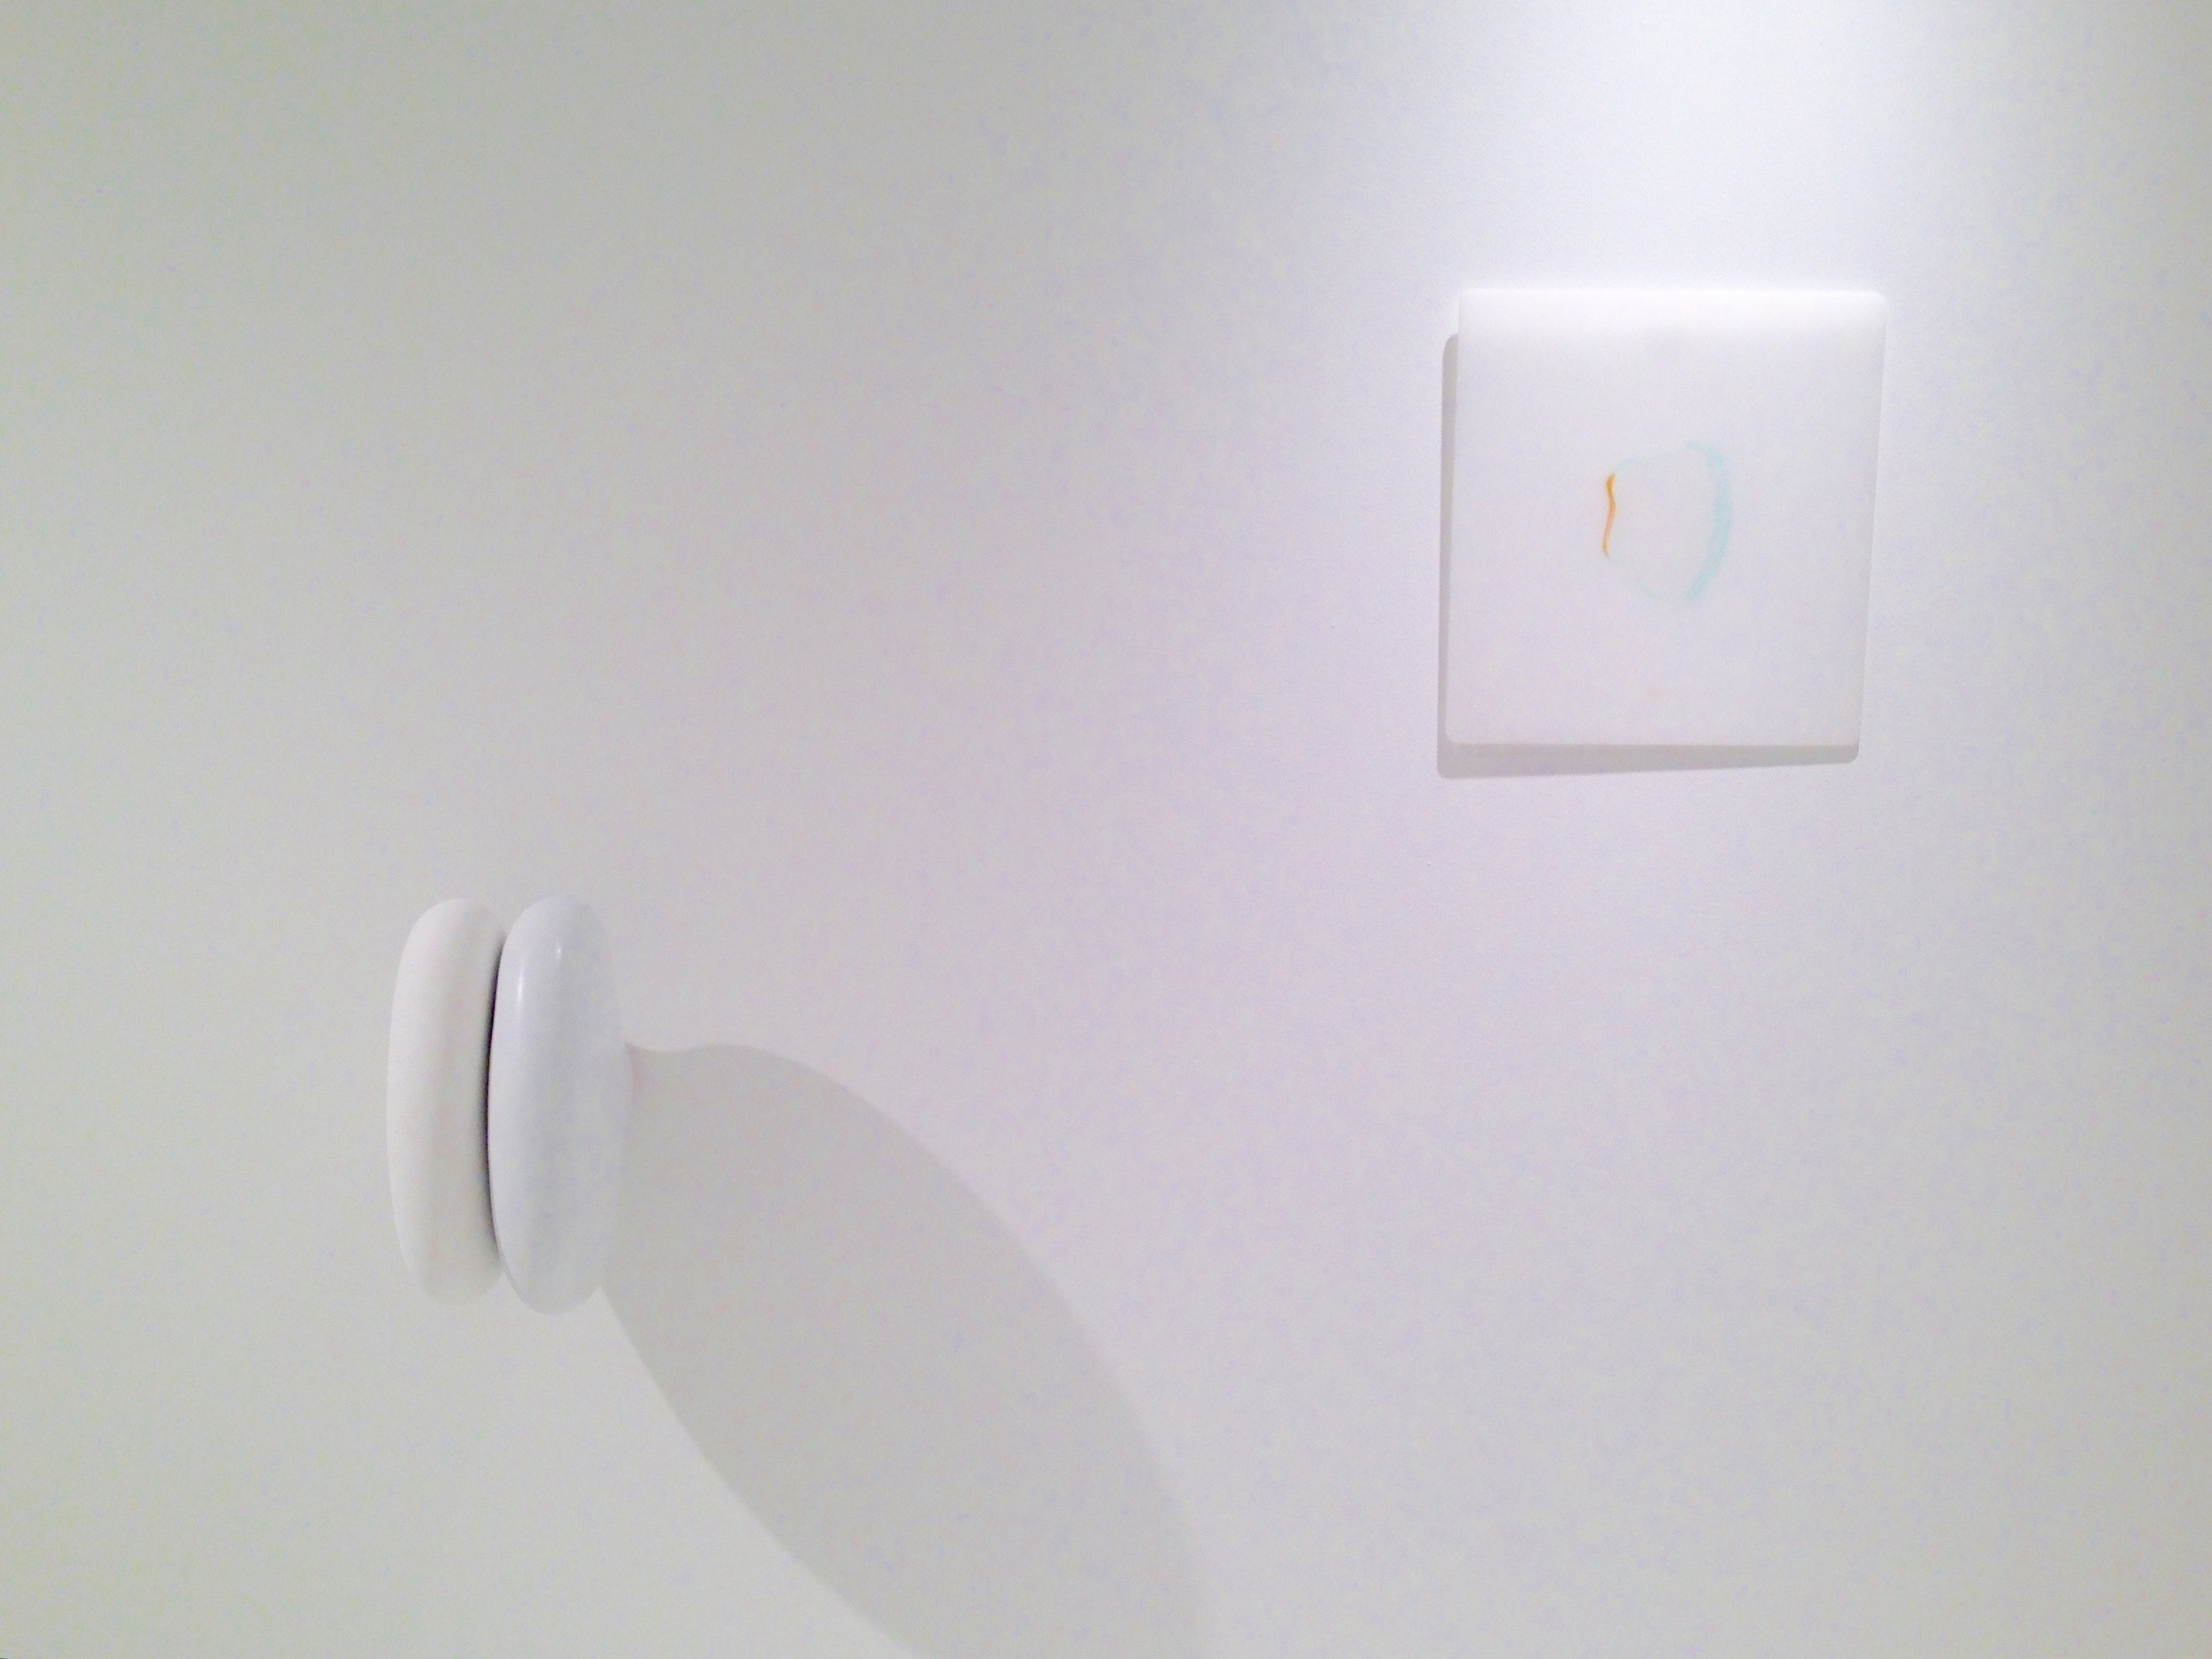 MT, untitled sculpture and plexi drawing, both 2004